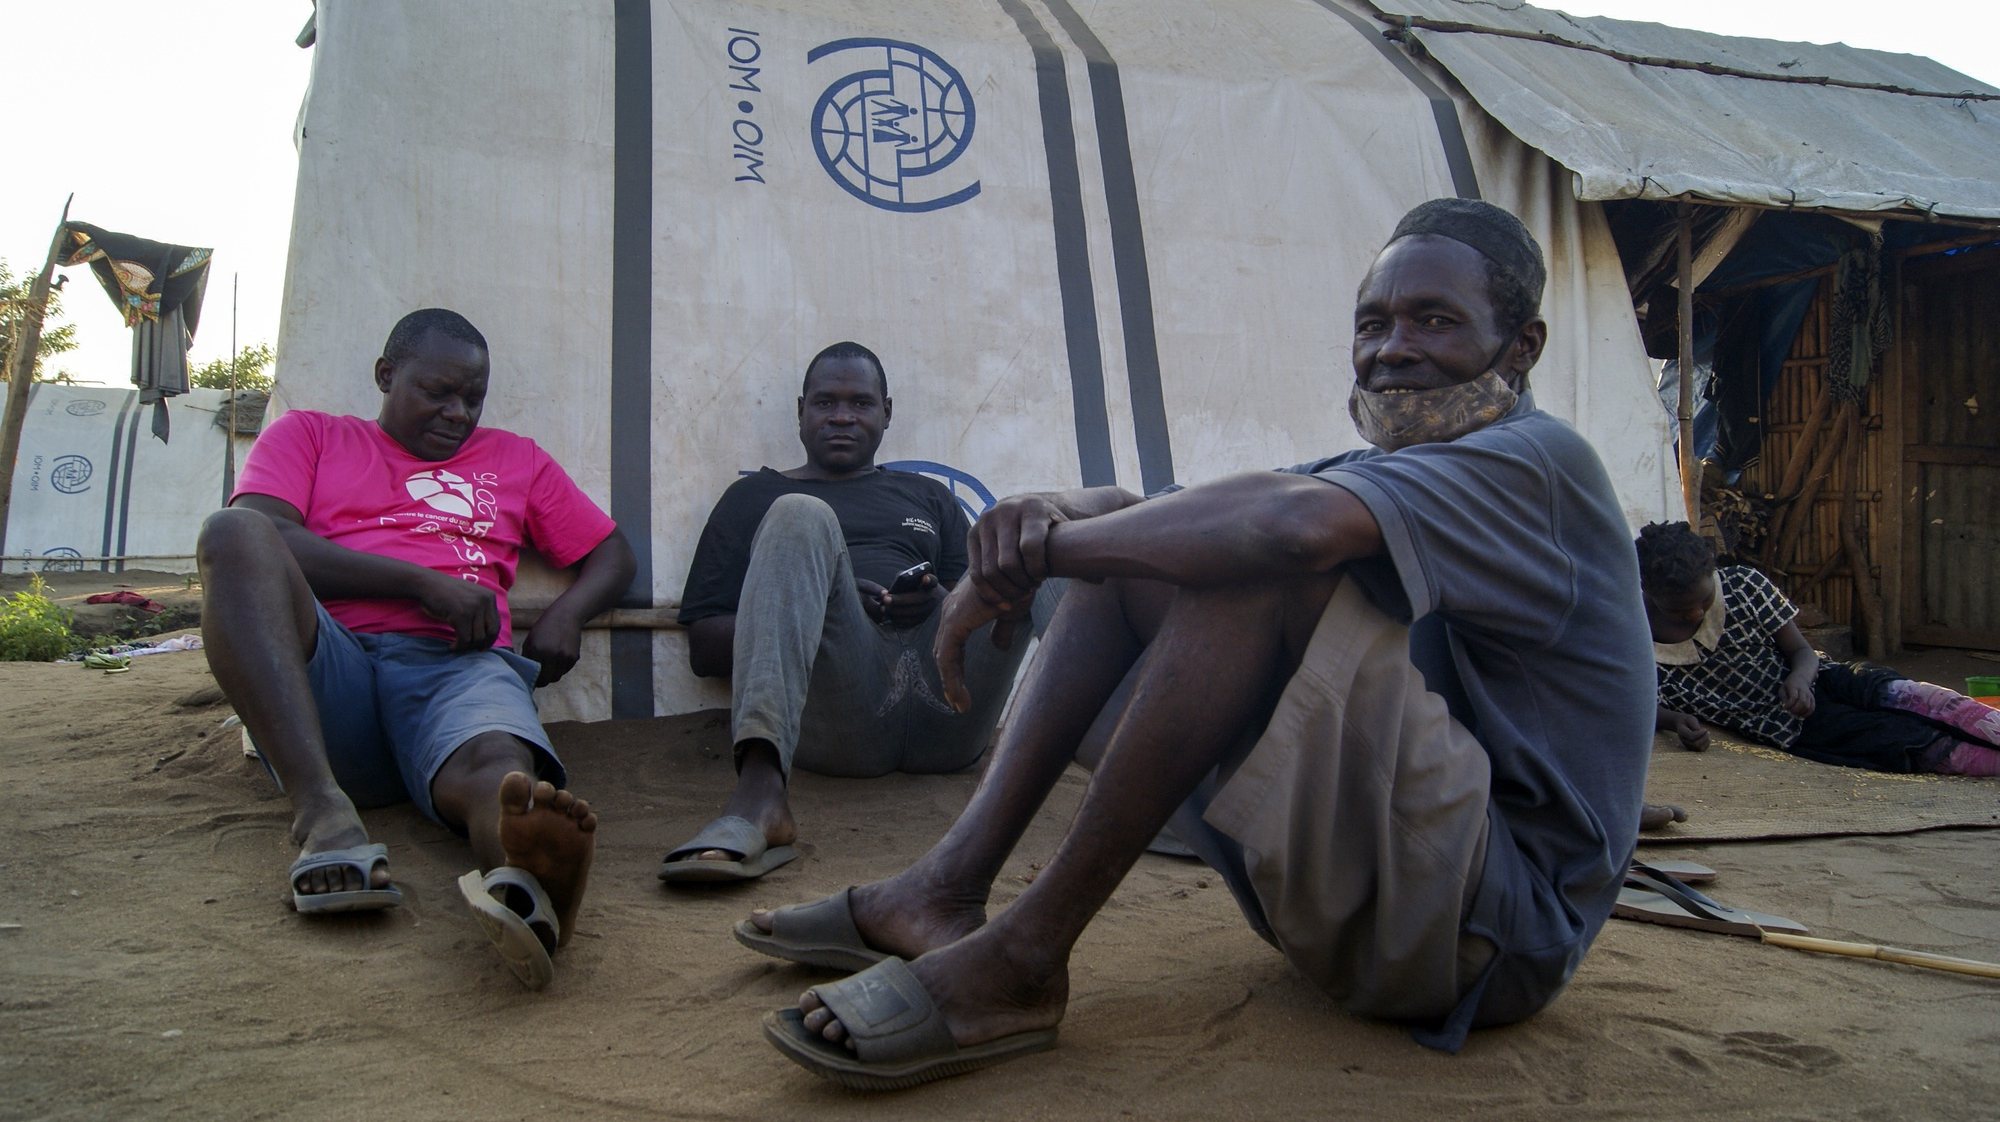 Men standing in one of the shelter camps in Metuge, a space housing displaced people fleeing armed violence in northern Mozambique. Cabo Delgado, Mozambique, 16 August 2021 (issue on 17 August 2021). Following the attacks, which have terrorized Cabo Delgado province since 2017, there are more than 3,100 deaths, according to the ACLED conflict registration project, and more than 817,000 displaced people, according to Mozambican authorities. LUISA NHANTUMBO/LUSA